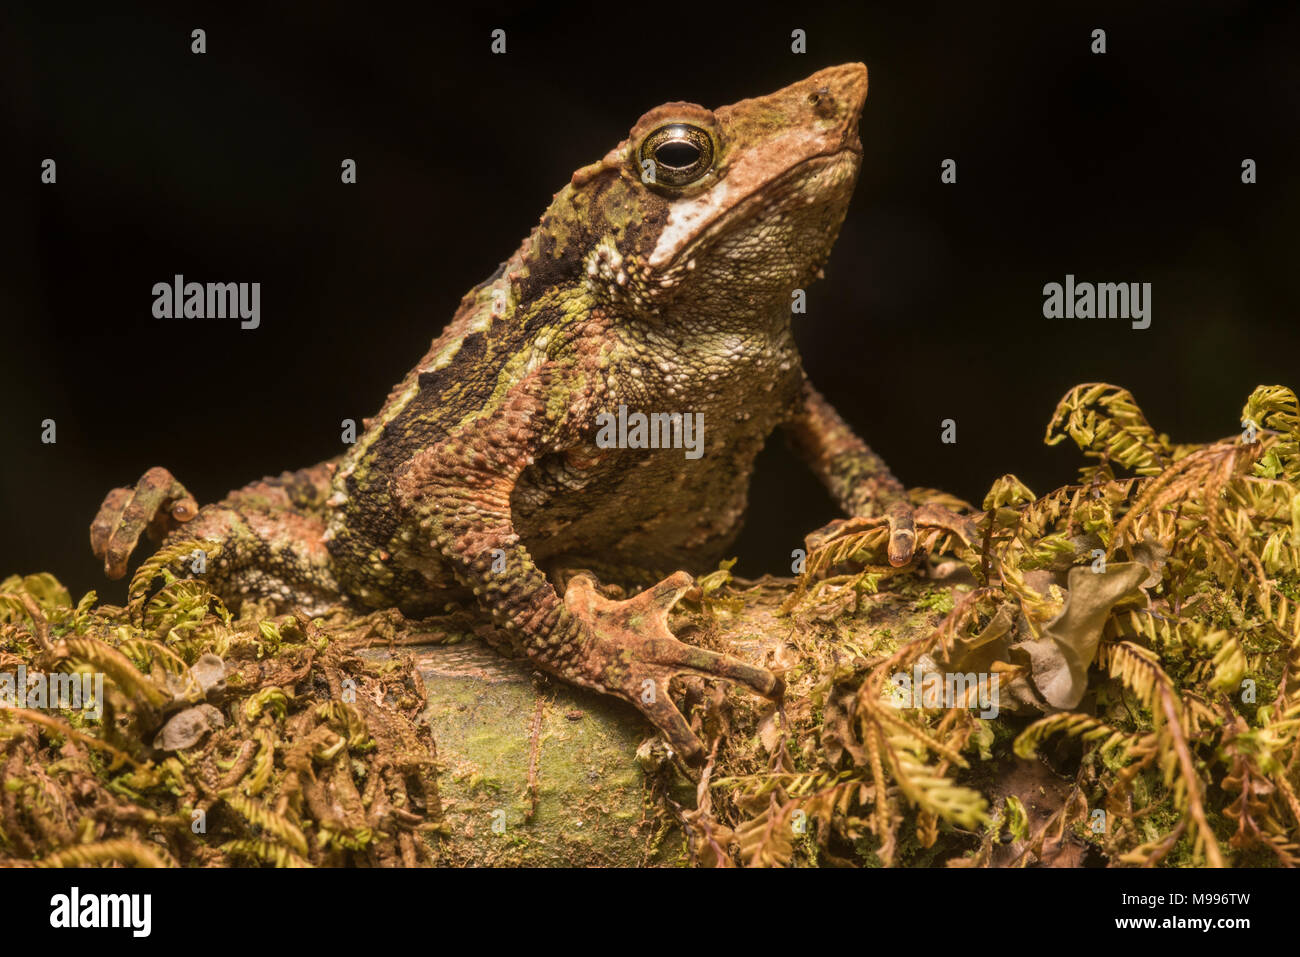 A brand new species, just scientifically described.  This is a semiarboreal toad (Rhinella lilyrodriguezae) only known from a small portion of Peru. Stock Photo